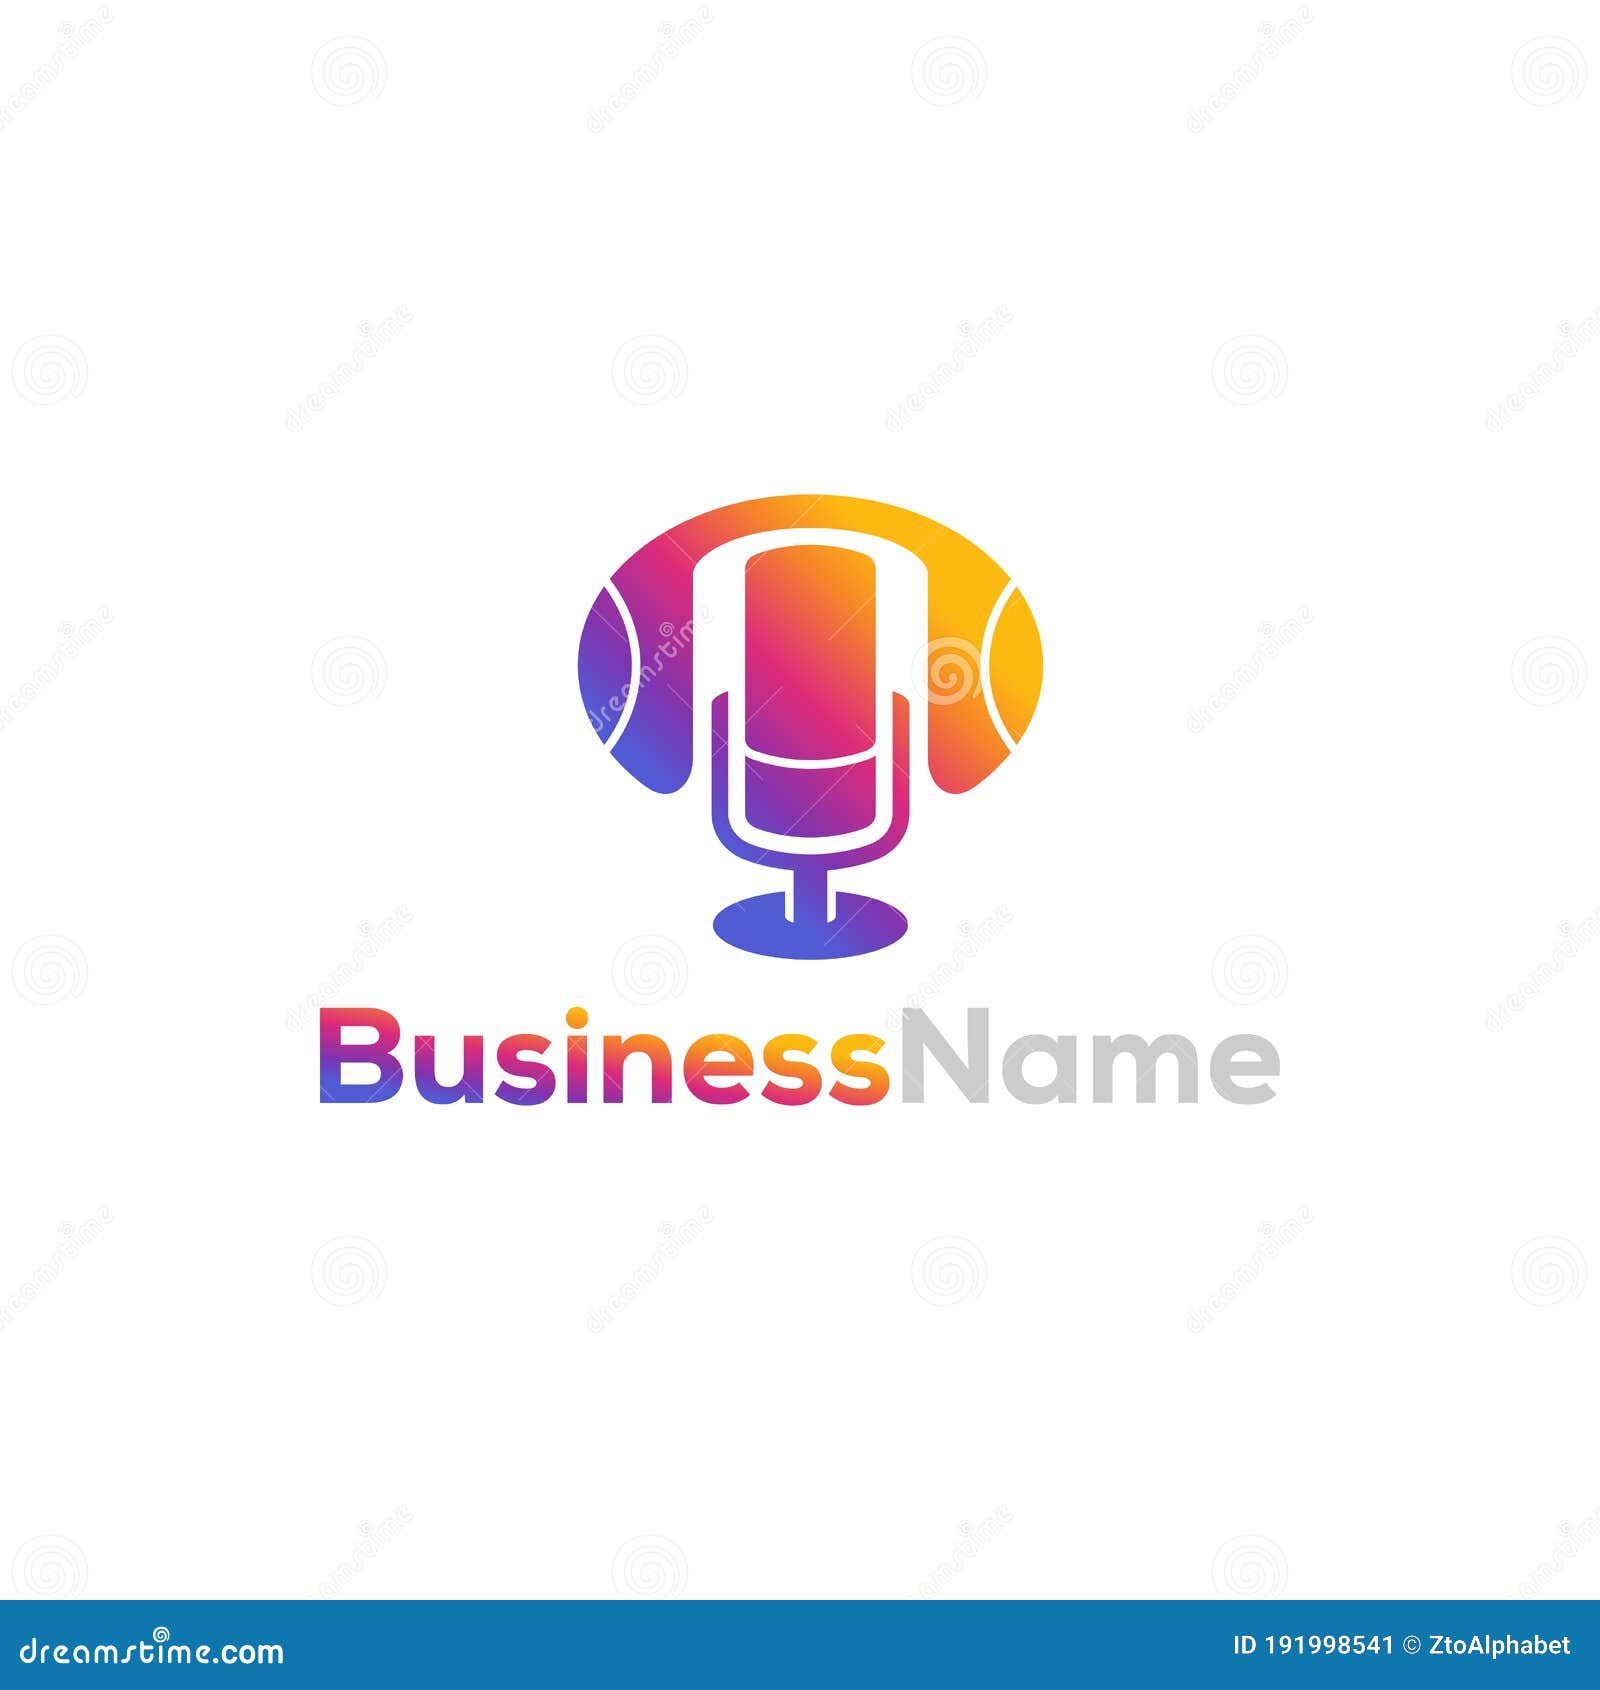 Podcast Audio Record Logo Template Stock Vector - Illustration of ...